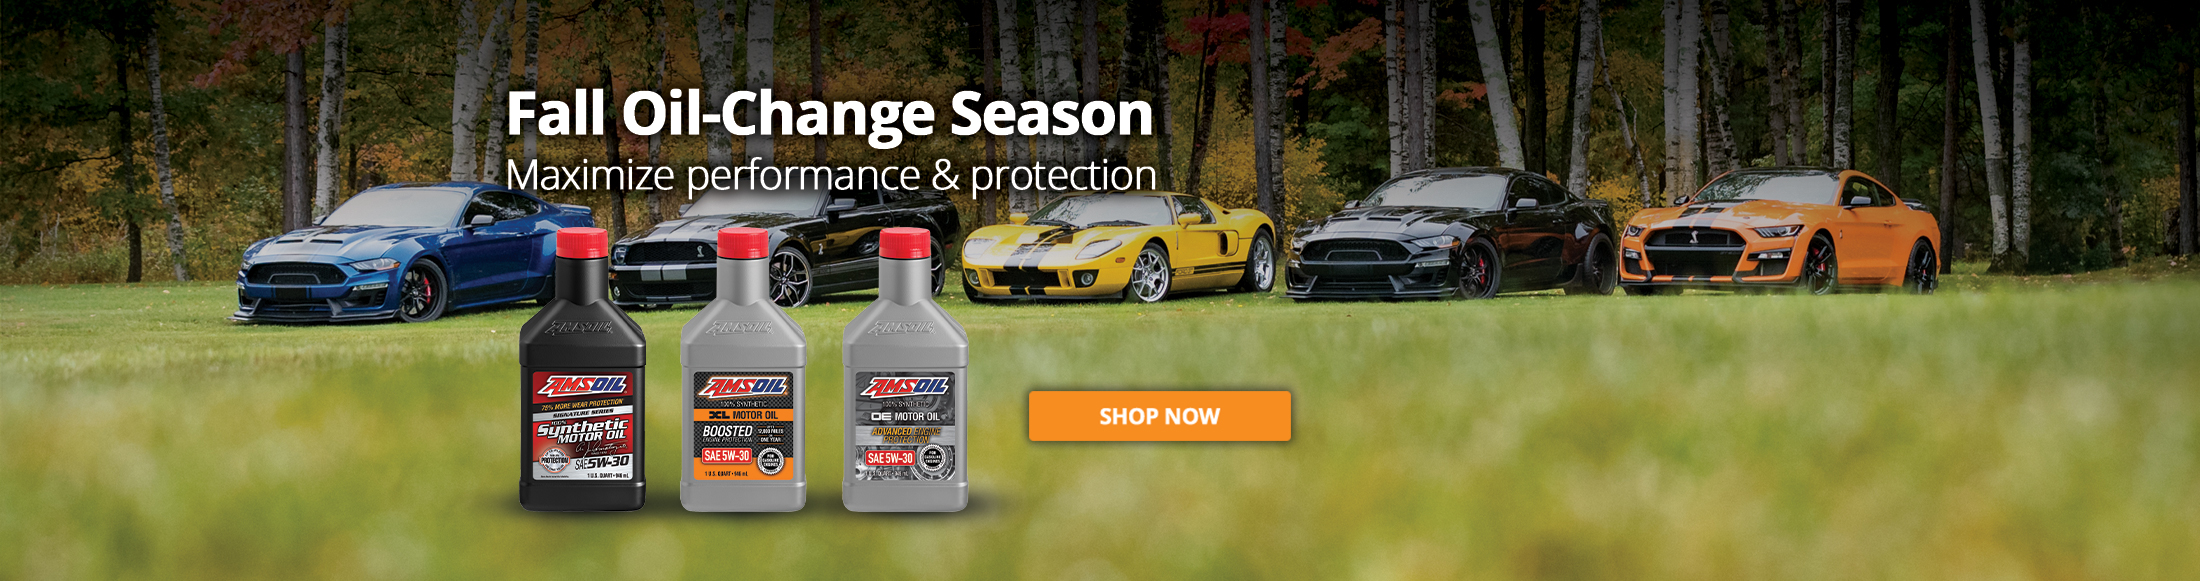 Due for an Oil Change? Maximize Performance and protection. Shop now, click to open.